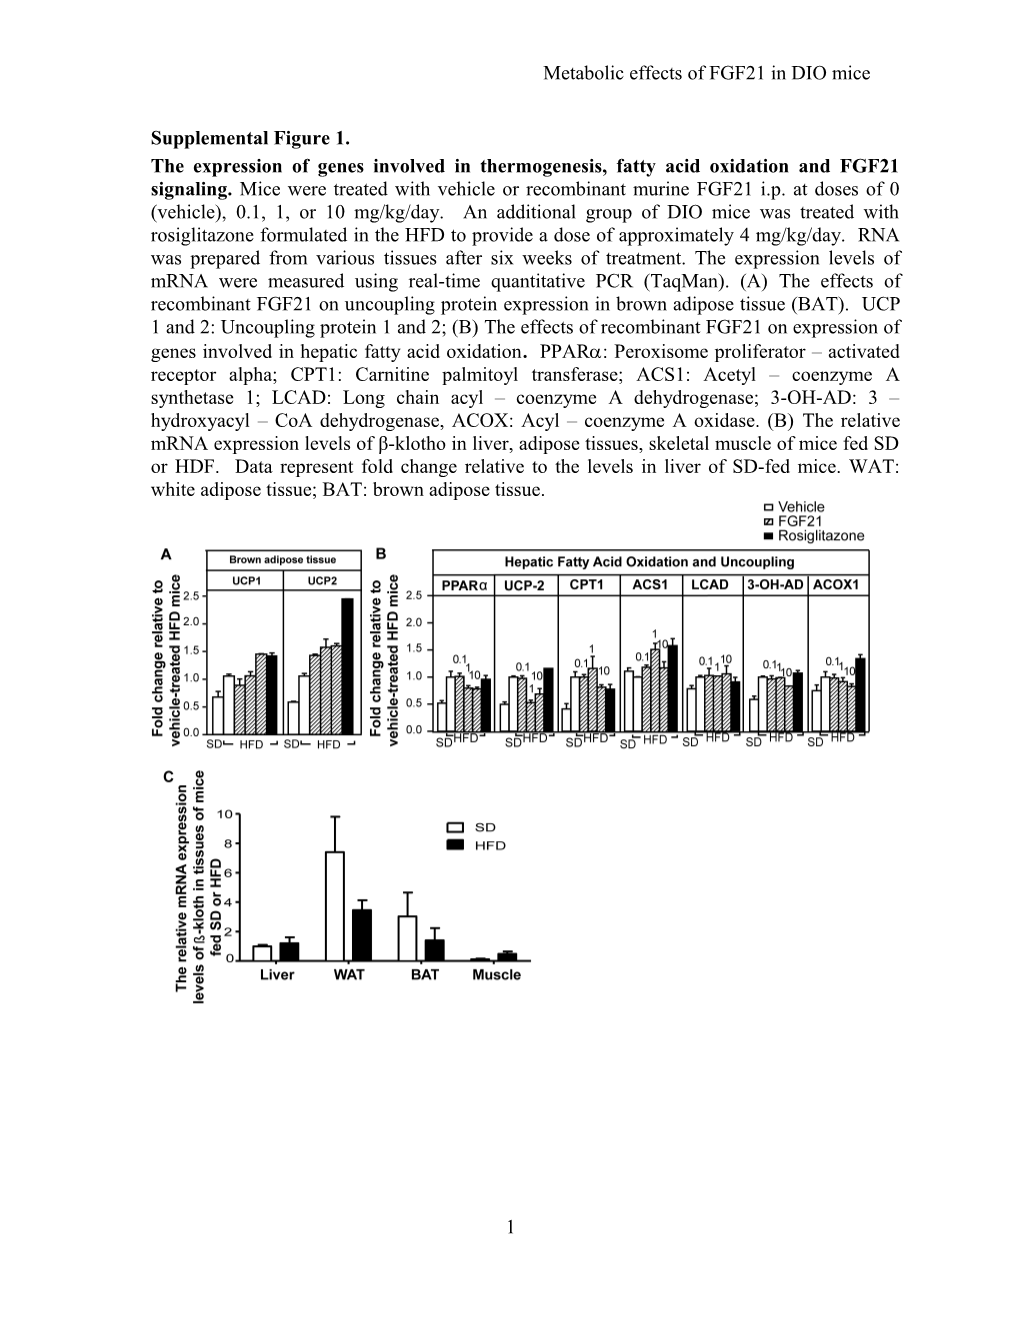 Metabolic Effects of FGF21 in DIO Mice